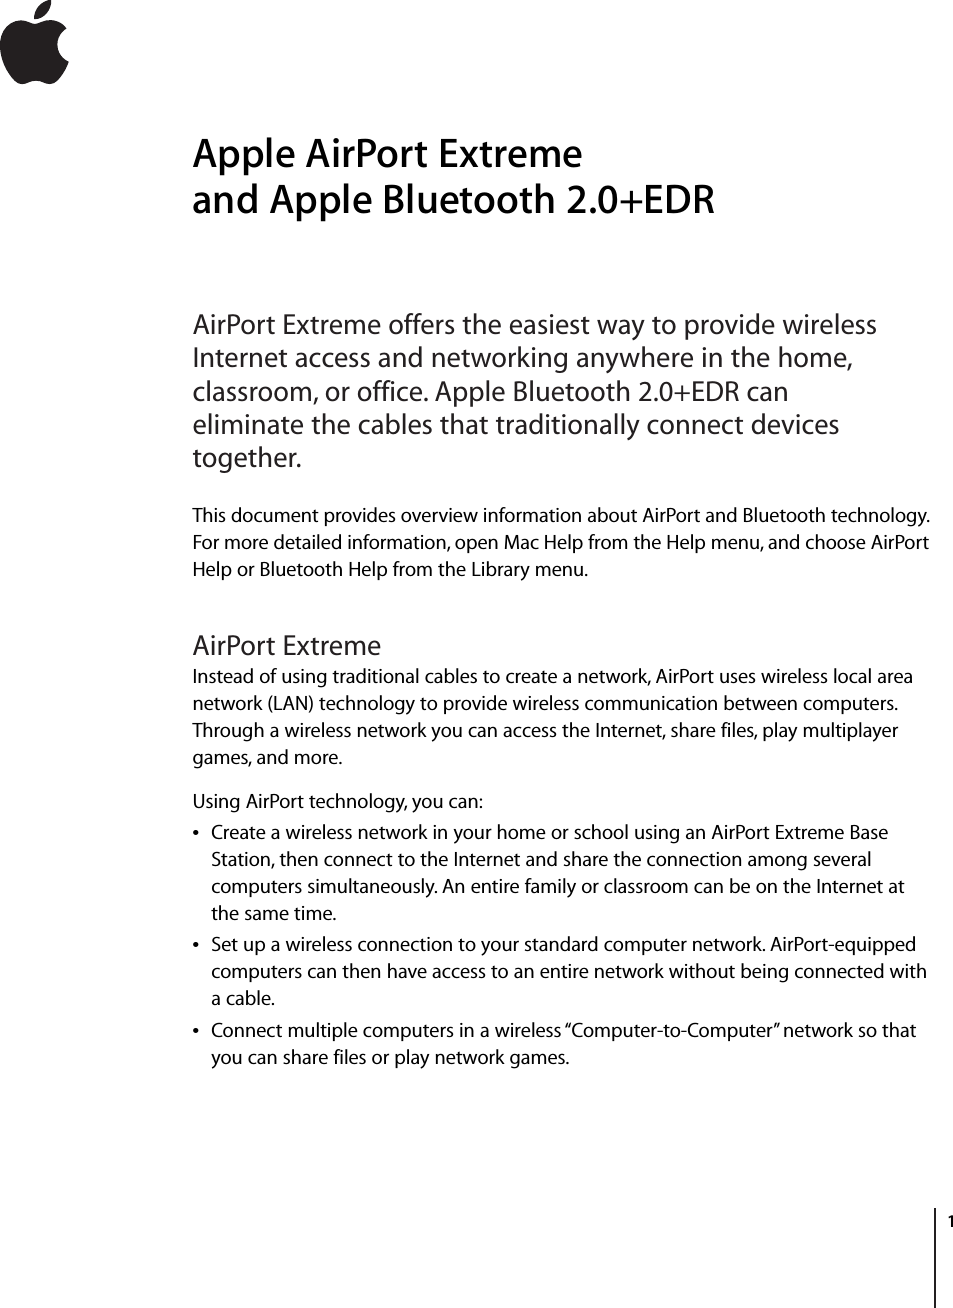         1 1 Apple AirPort Extreme and Apple Bluetooth 2.0+EDR AirPort Extreme offers the easiest way to provide wireless Internet access and networking anywhere in the home, classroom, or office. Apple Bluetooth 2.0+EDR can eliminate the cables that traditionally connect devices together. This document provides overview information about AirPort and Bluetooth technology. For more detailed information, open Mac Help from the Help menu, and choose AirPort Help or Bluetooth Help from the Library menu. AirPort Extreme Instead of using traditional cables to create a network, AirPort uses wireless local area network (LAN) technology to provide wireless communication between computers. Through a wireless network you can access the Internet, share files, play multiplayer games, and more.Using AirPort technology, you can:Â Create a wireless network in your home or school using an AirPort Extreme Base Station, then connect to the Internet and share the connection among several computers simultaneously. An entire family or classroom can be on the Internet at the same time.Â Set up a wireless connection to your standard computer network. AirPort-equipped computers can then have access to an entire network without being connected with a cable.Â Connect multiple computers in a wireless “Computer-to-Computer” network so that you can share files or play network games. 